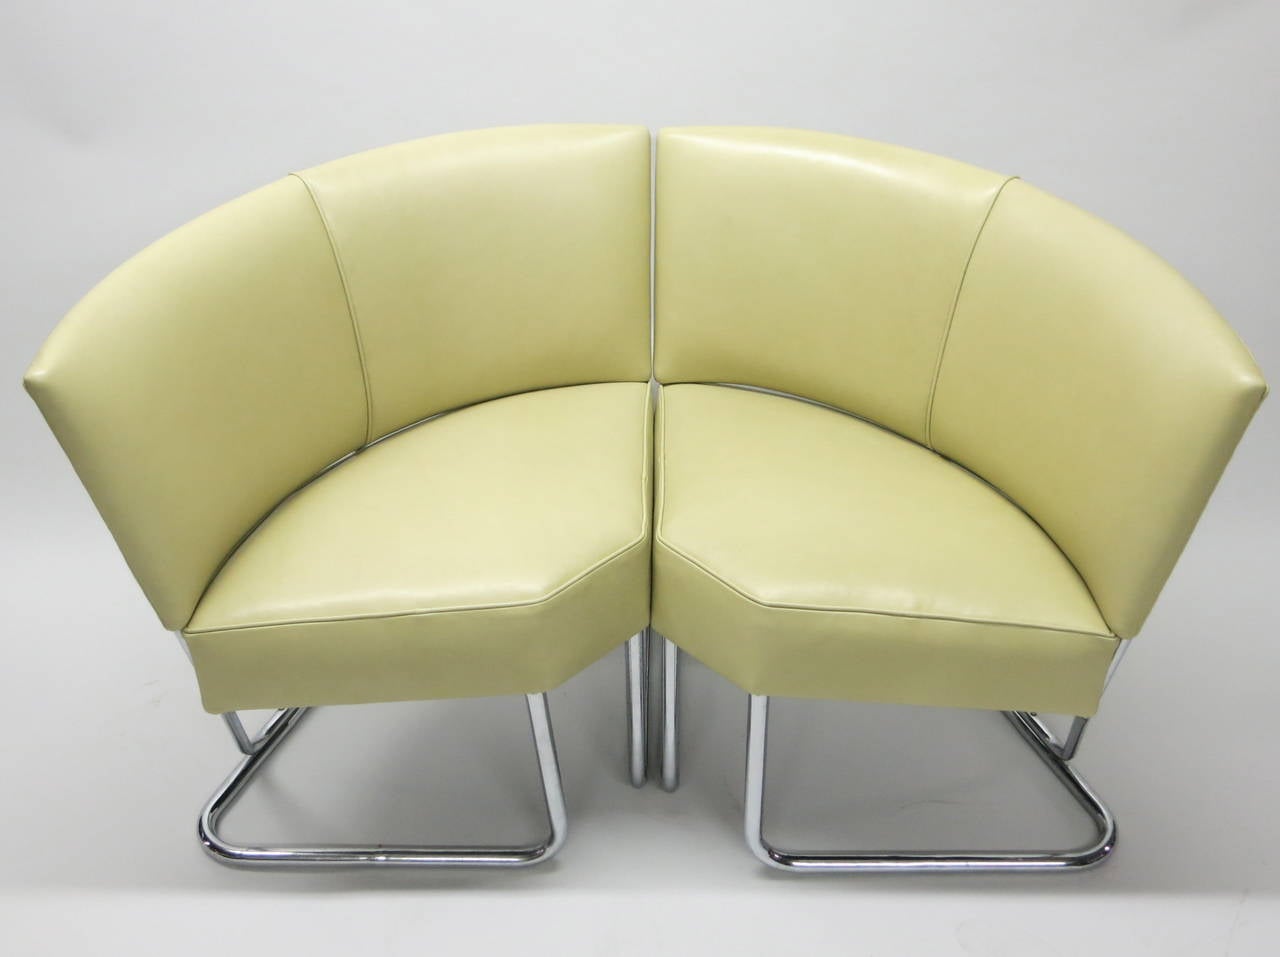 Pair of tubular steel framed chairs by Thonet with a curved seat and arched back that were originally designed for corner use and that can be used separately or positioned together. They have been reupholstered in a pale yellow-green leather. Each